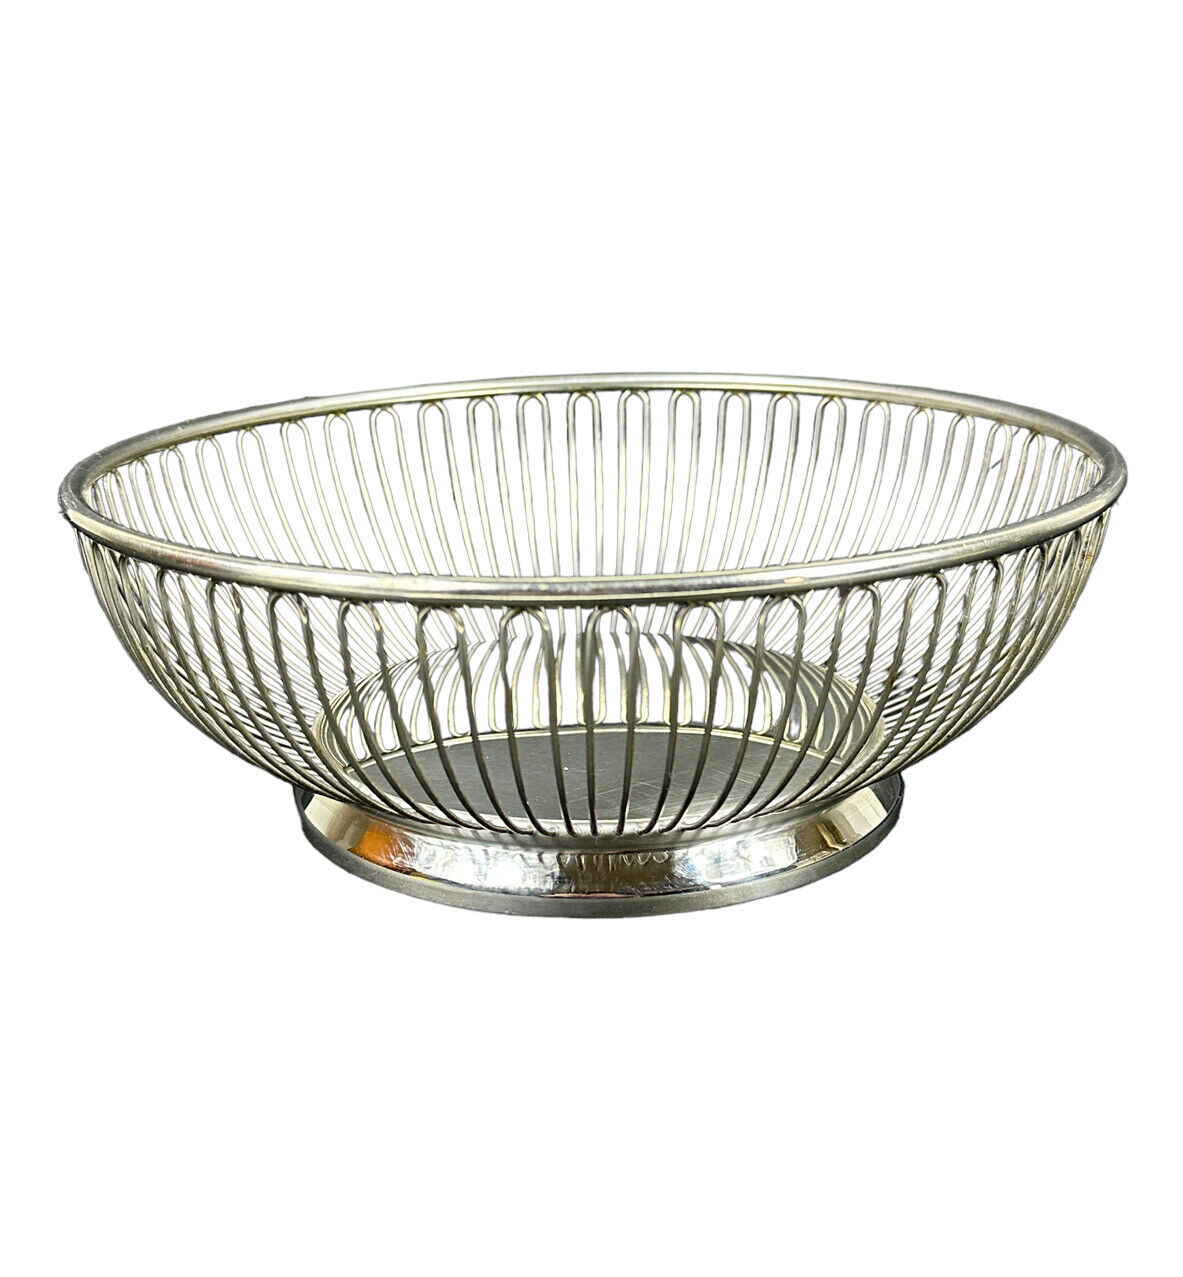 Alessi International Stainless Wire Basket Bowl 4025 Made in Italy EUC